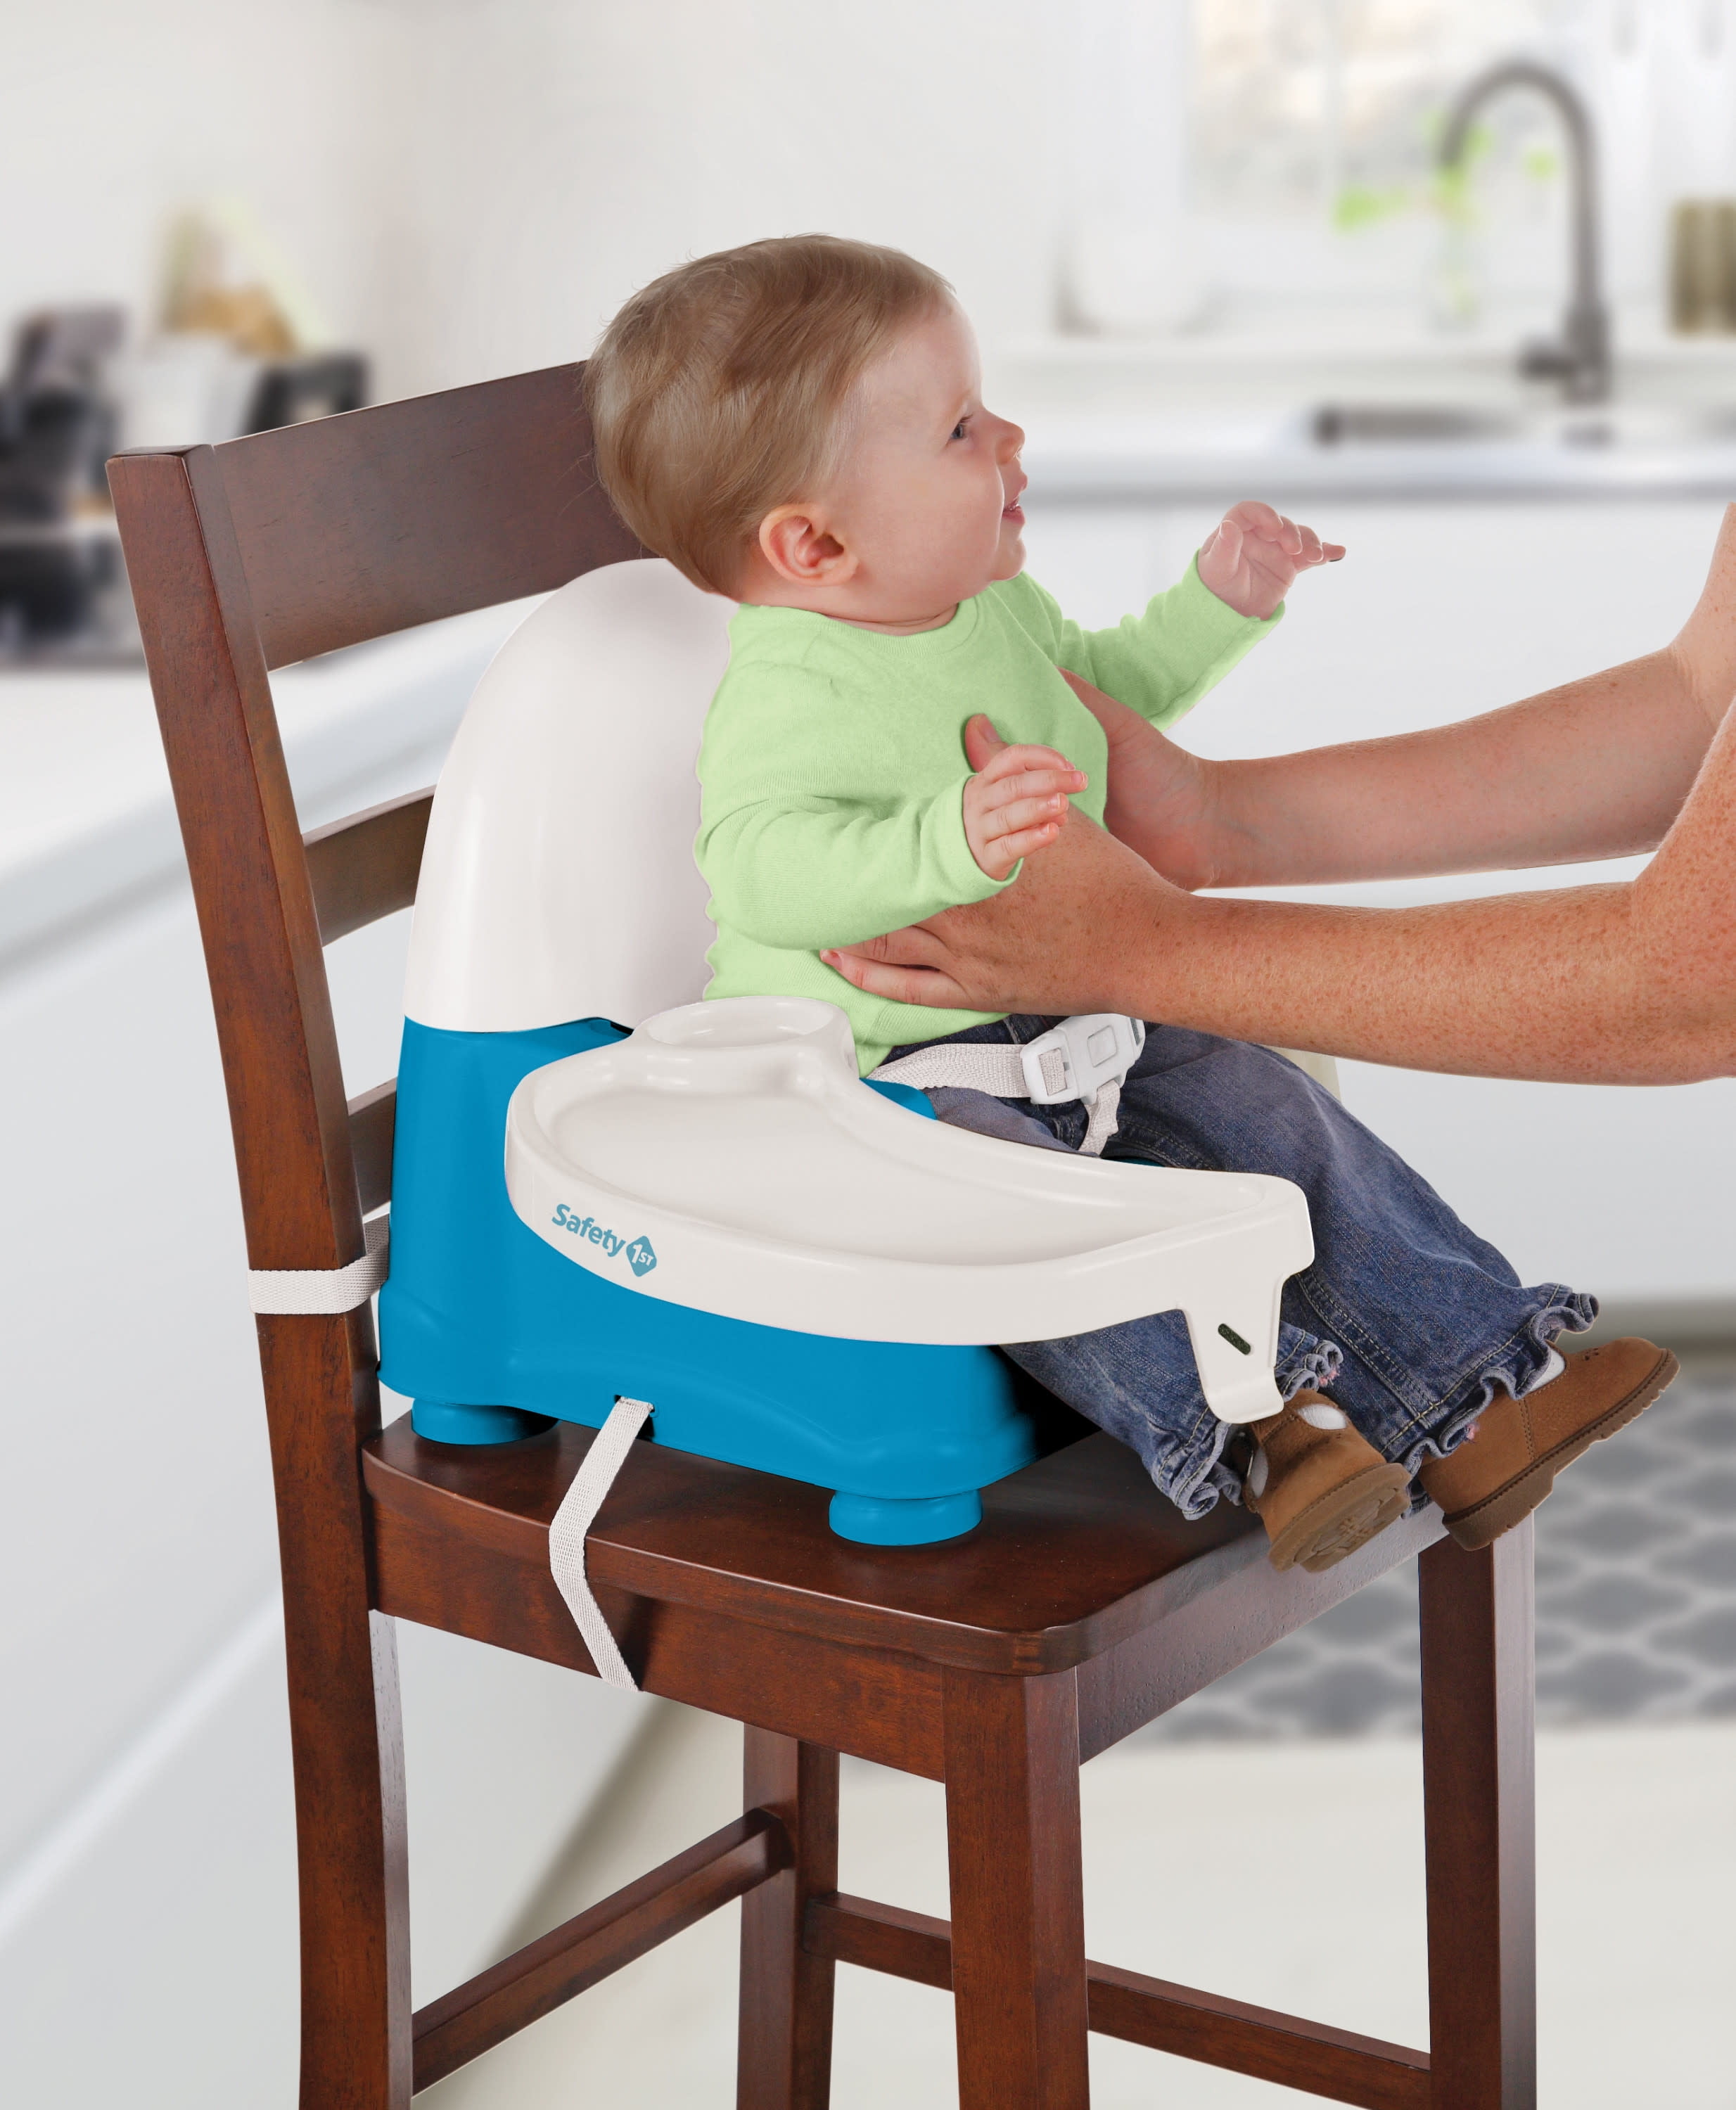 Safety 1st Easy Care Swing Tray Booster Seat|Home & Travel Feeding & Play Chair 